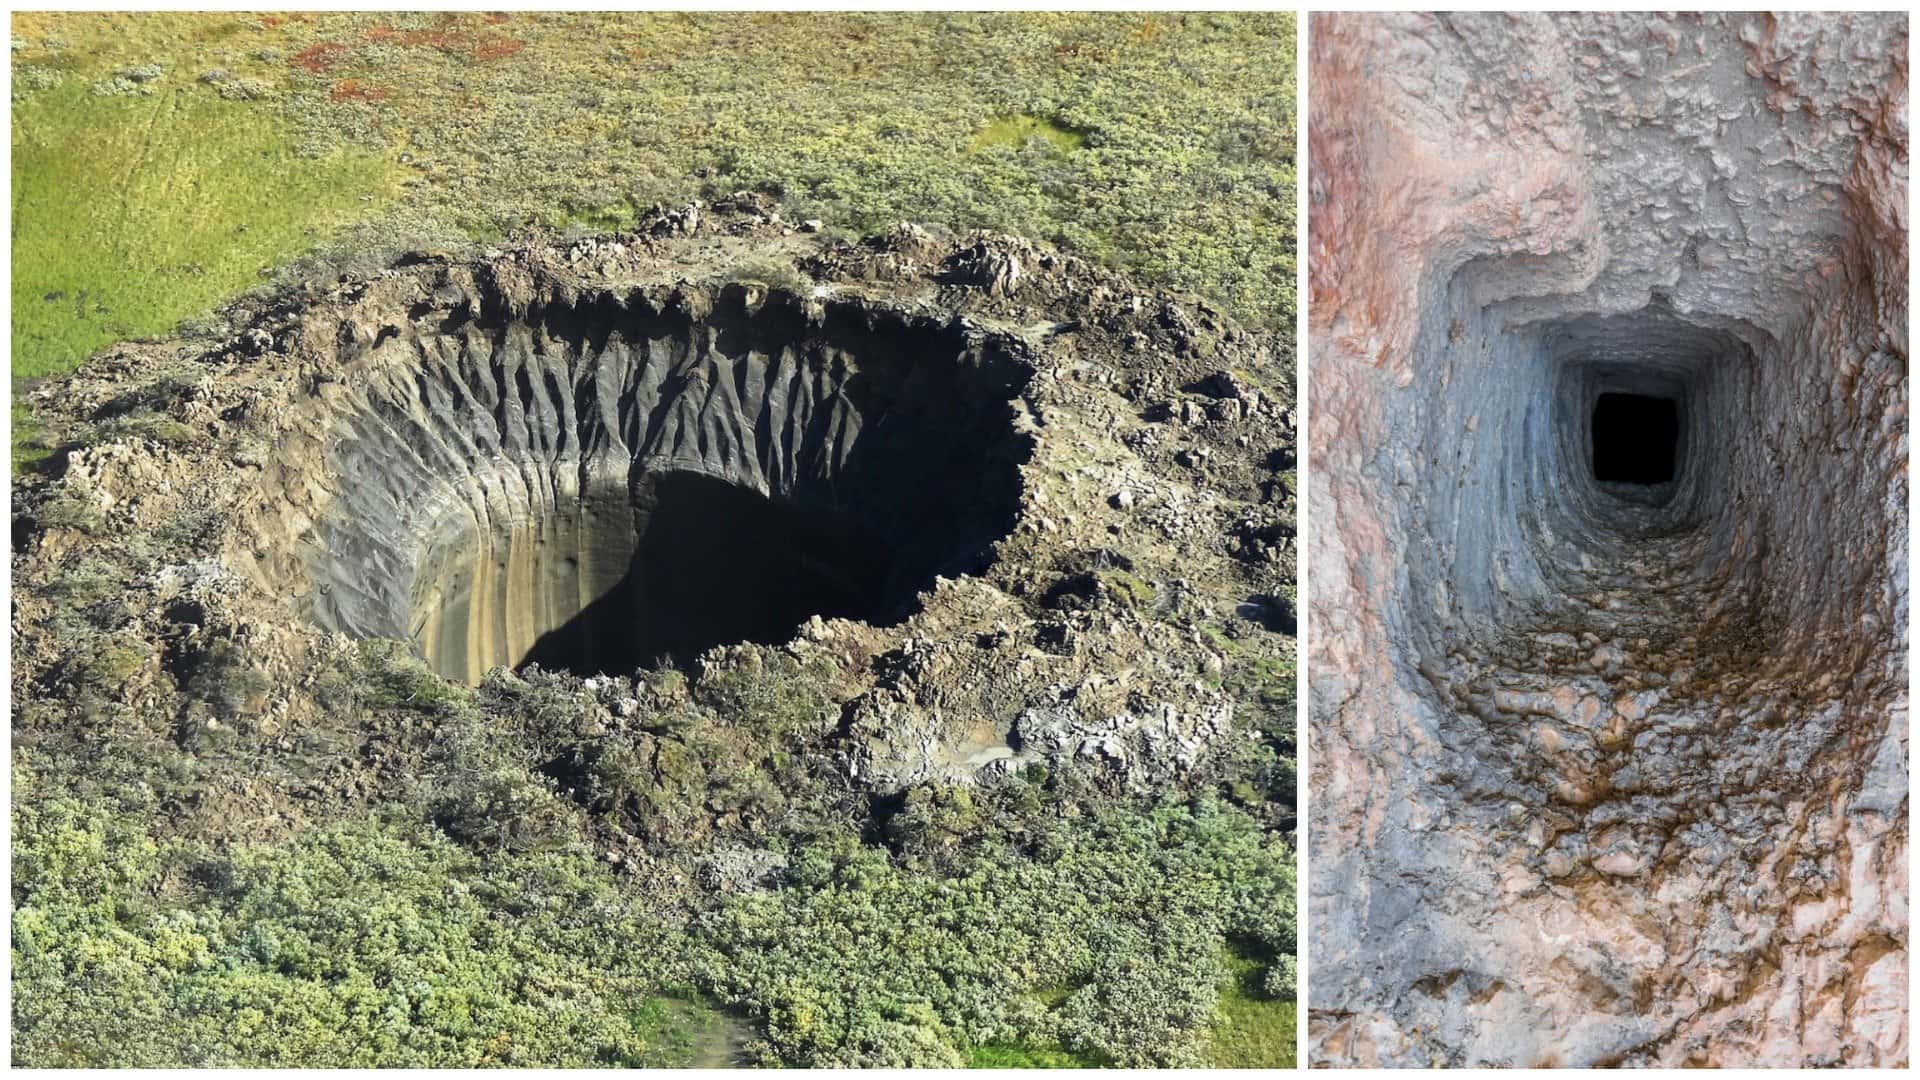 The Real Reason Experts Had To Seal Up The Deepest Hole On The Planet